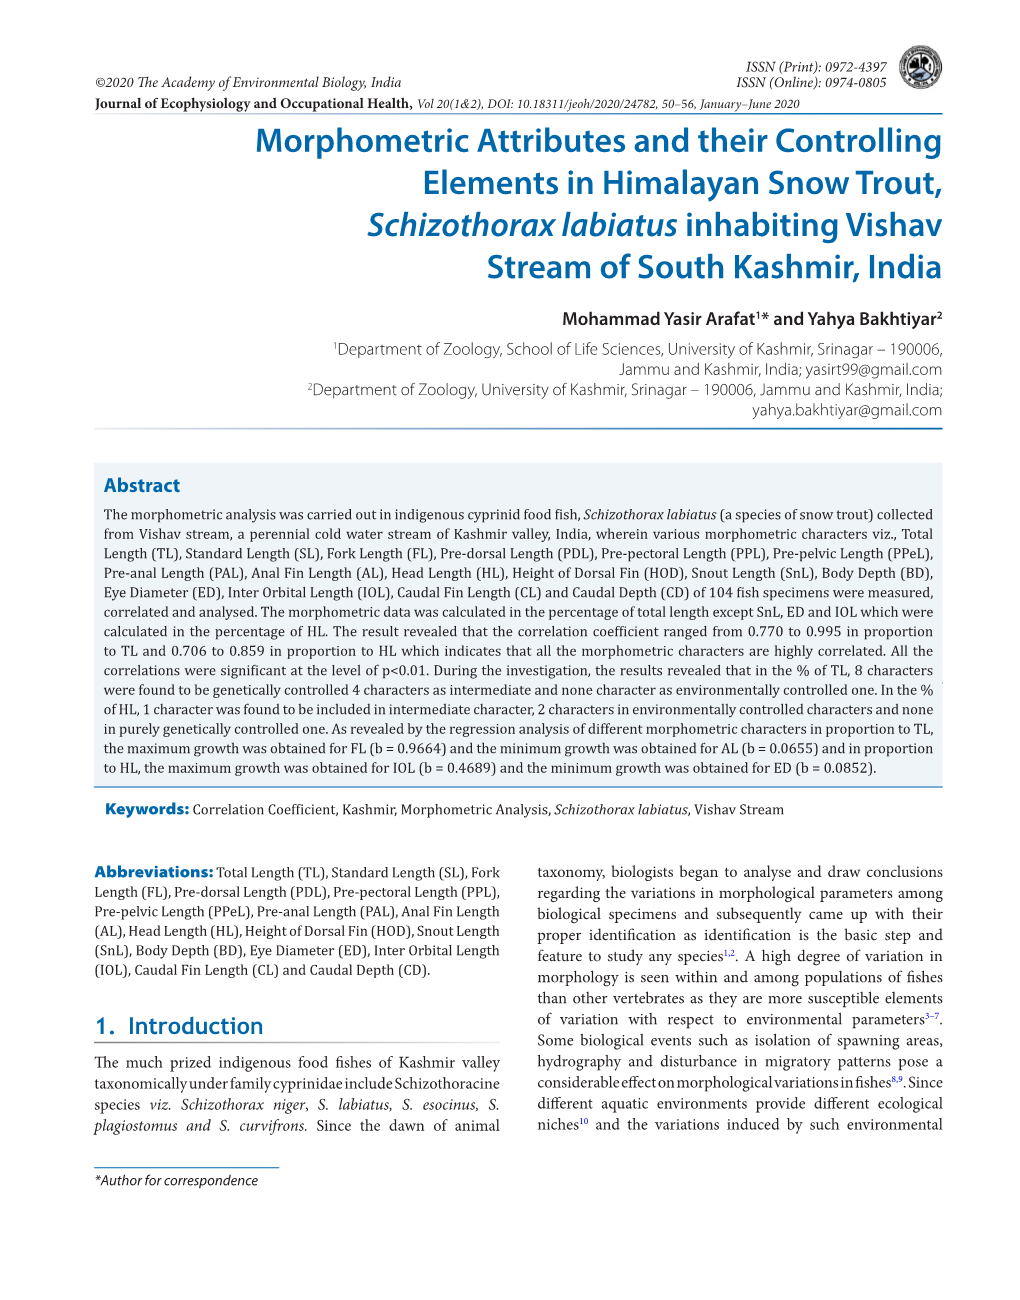 Morphometric Attributes and Their Controlling Elements in Himalayan Snow Trout, Schizothorax Labiatus Inhabiting Vishav Stream of South Kashmir, India